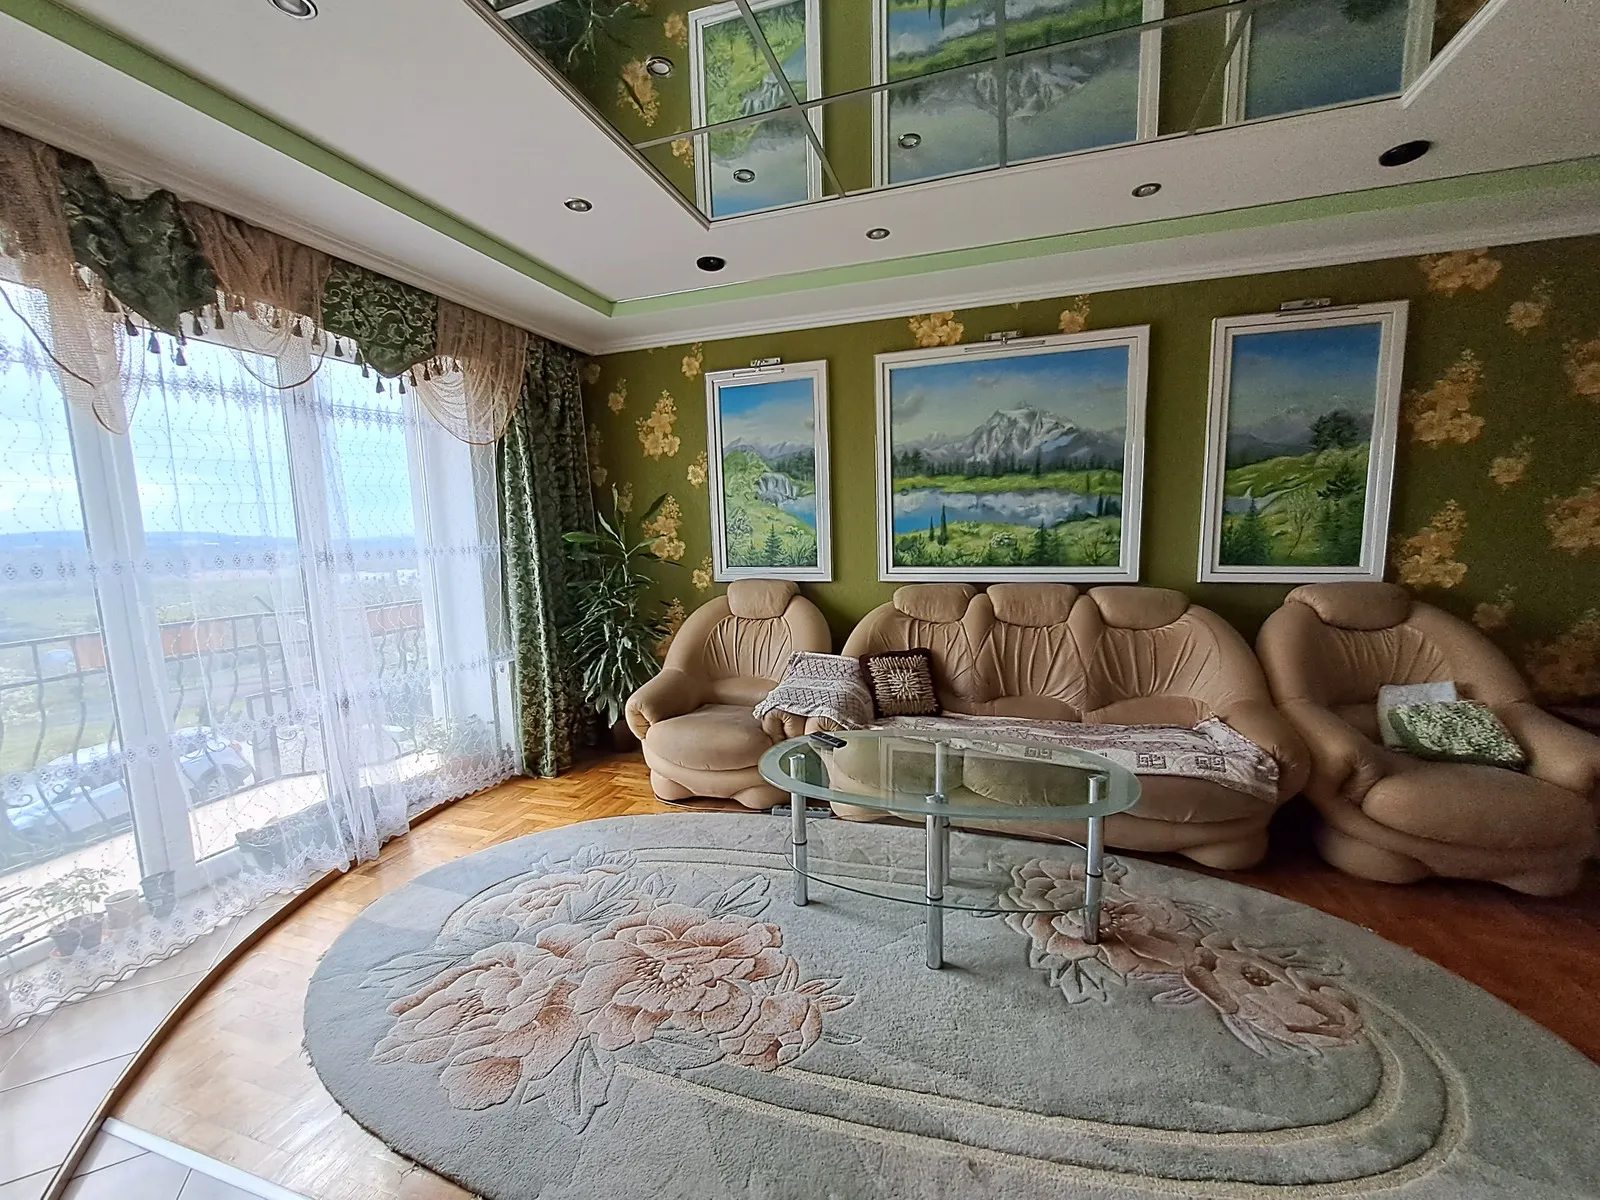 House for sale. 210 m², 2 floors. Petrykov. 